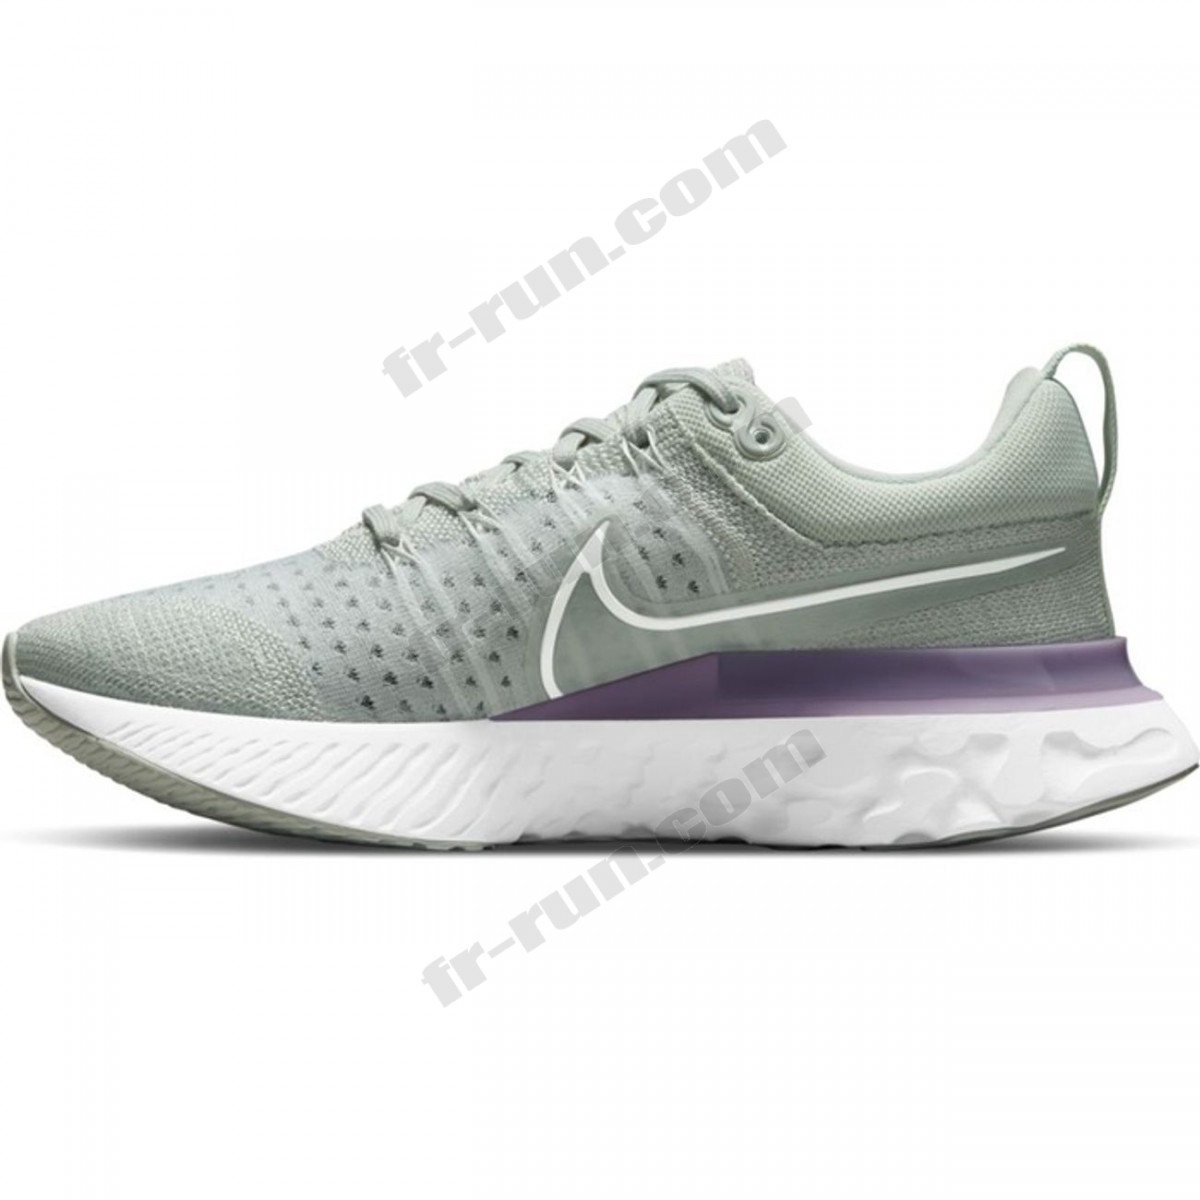 Nike/CHAUSSURES BASSES running femme NIKE W NIKE REACT INFINITY RUN FK 2 √ Nouveau style √ Soldes - -1